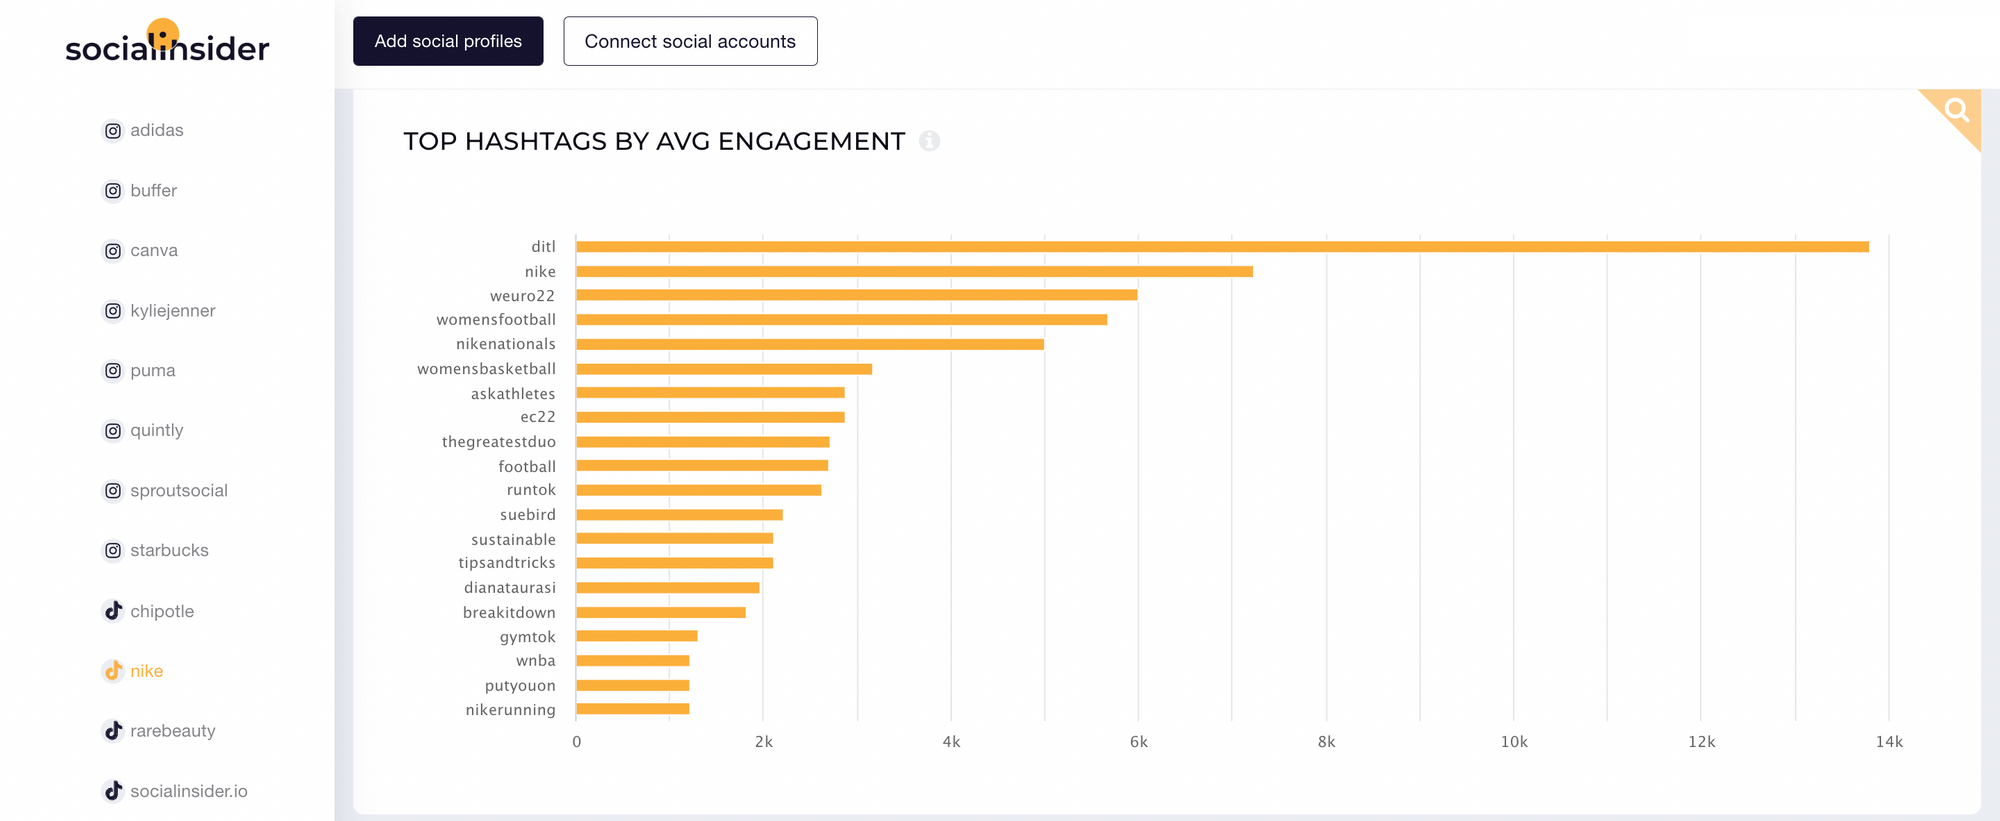 Hashtags by average engagement for Nike on TikTok